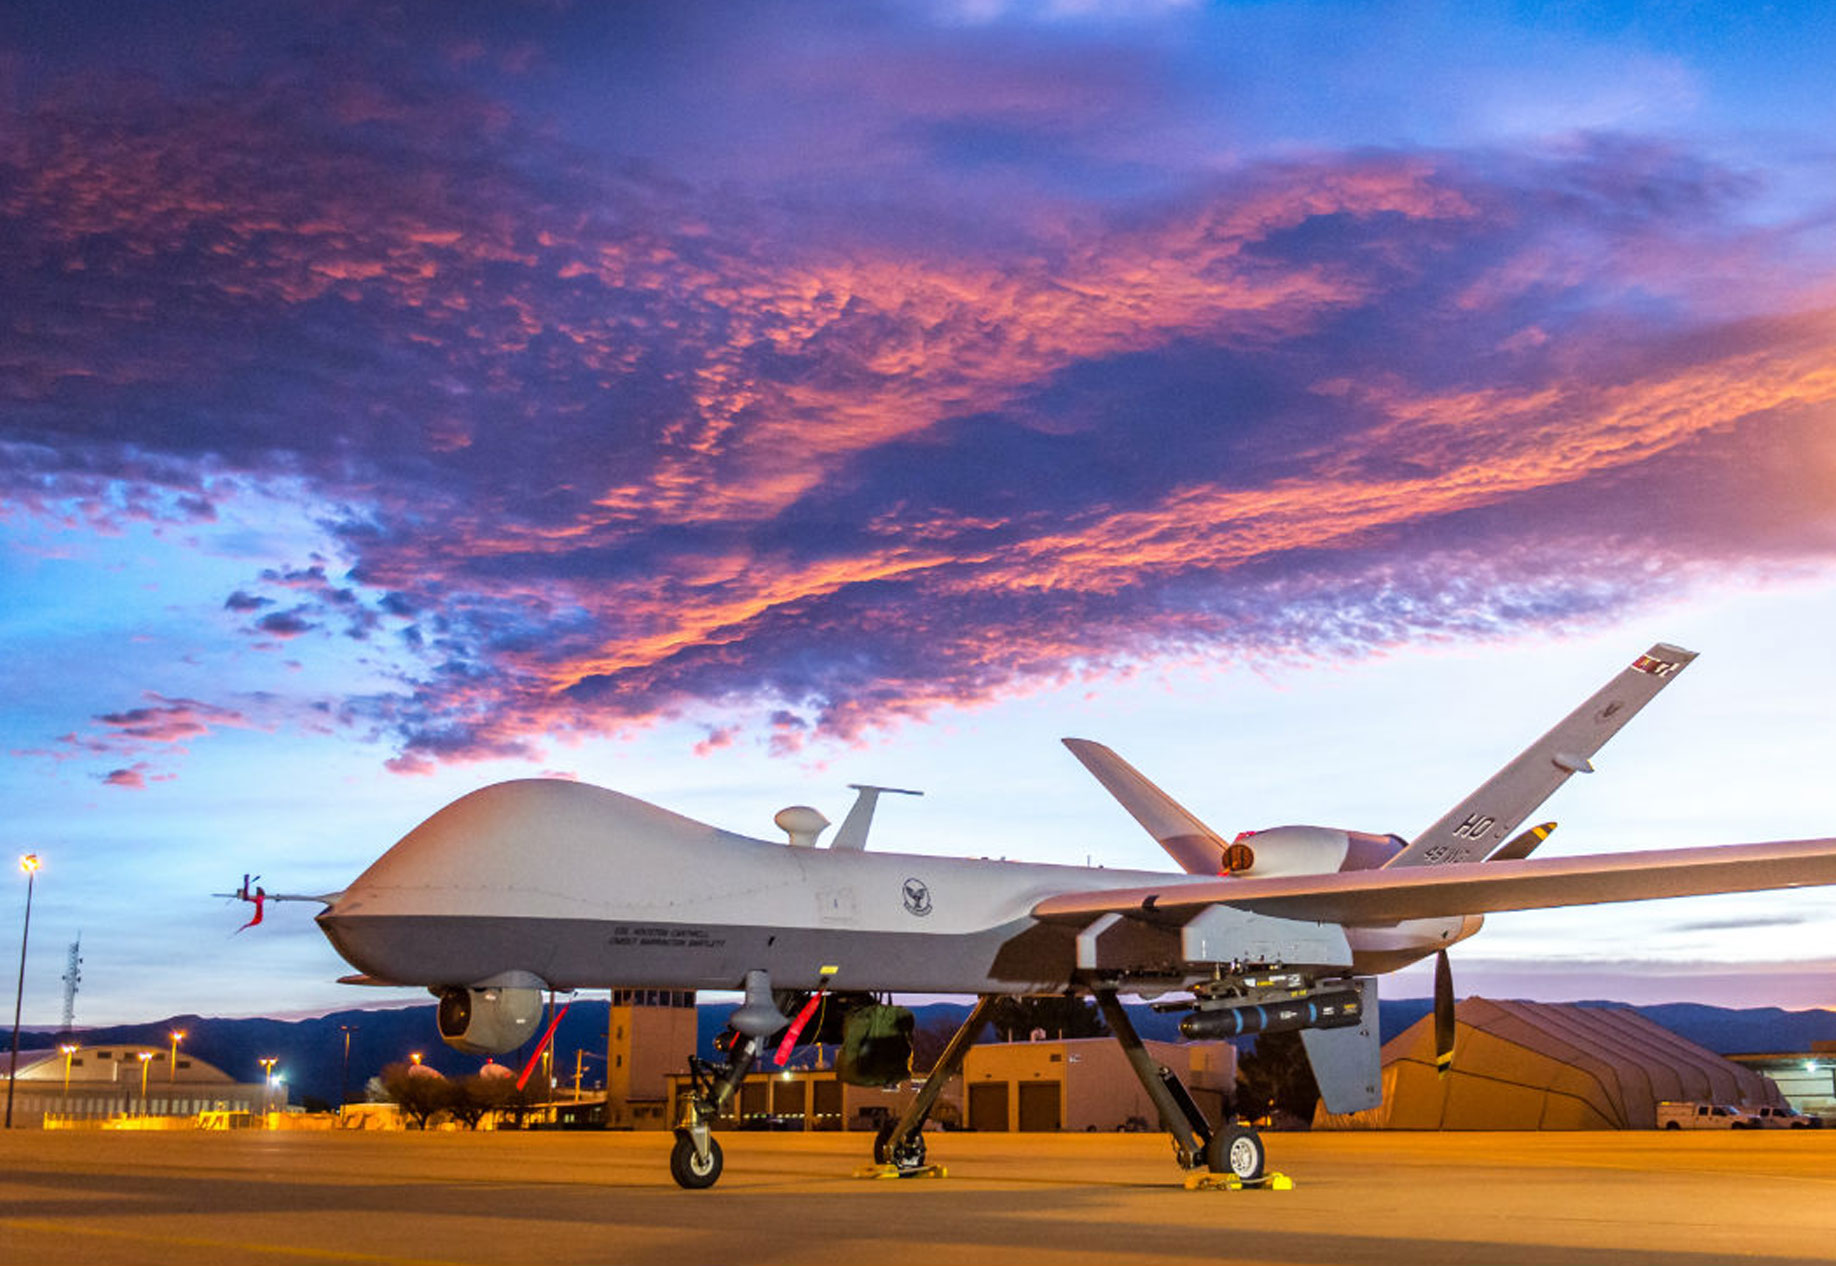 Incredible Image Of The Mq Reaper Military Drone Pictures